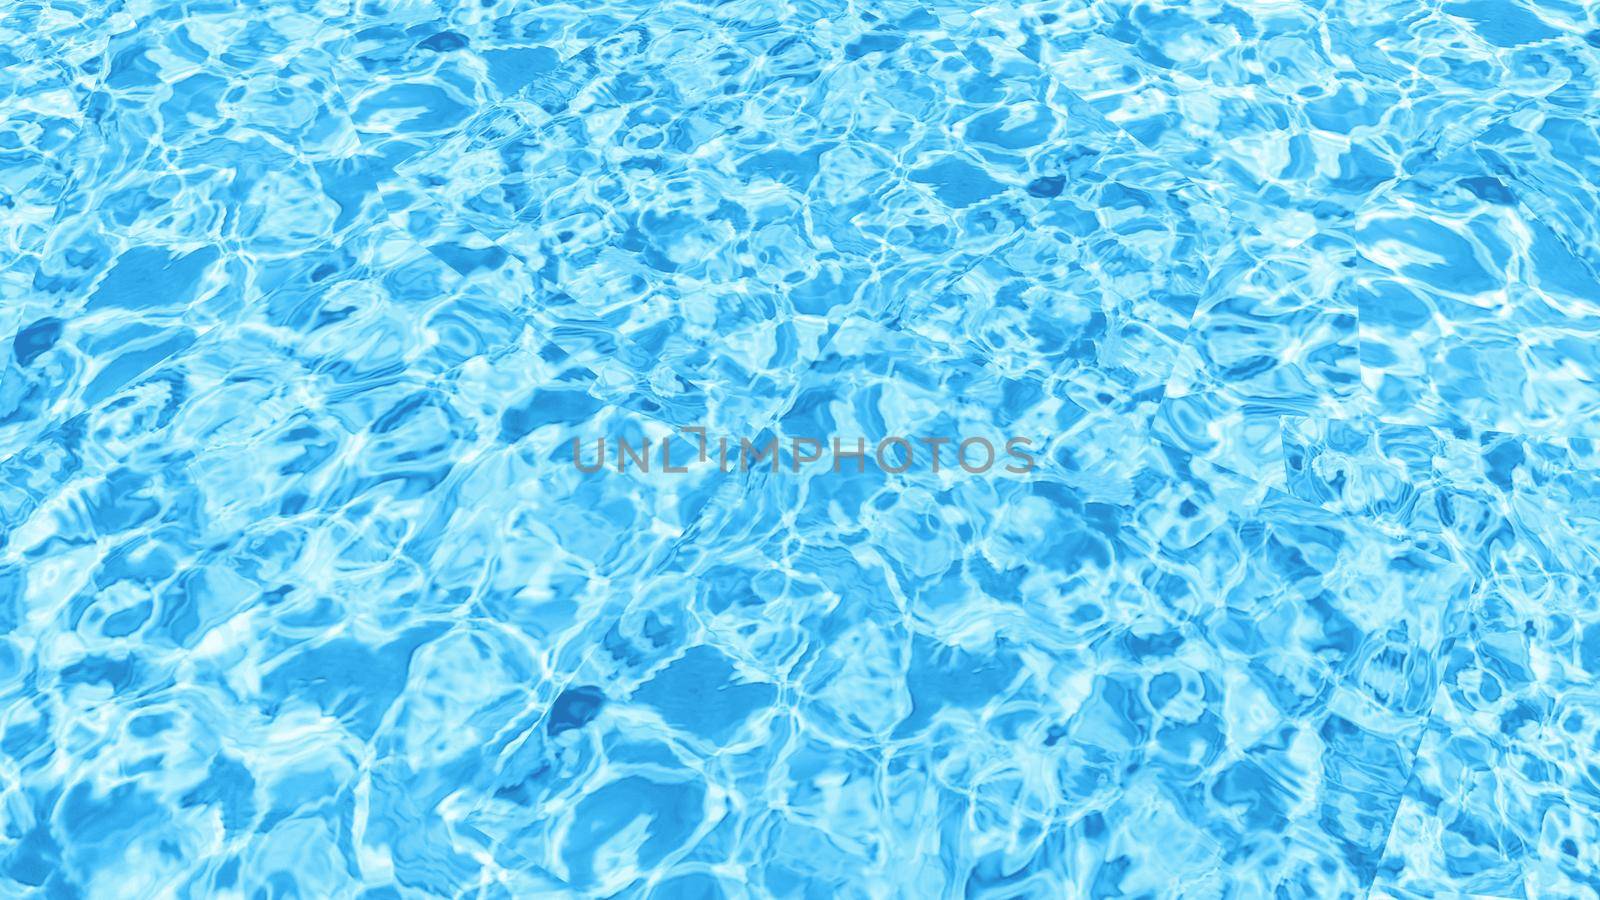 Closeup of desaturated transparent clear calm water surface texture with splashes and bubbles. Trendy abstract nature background.